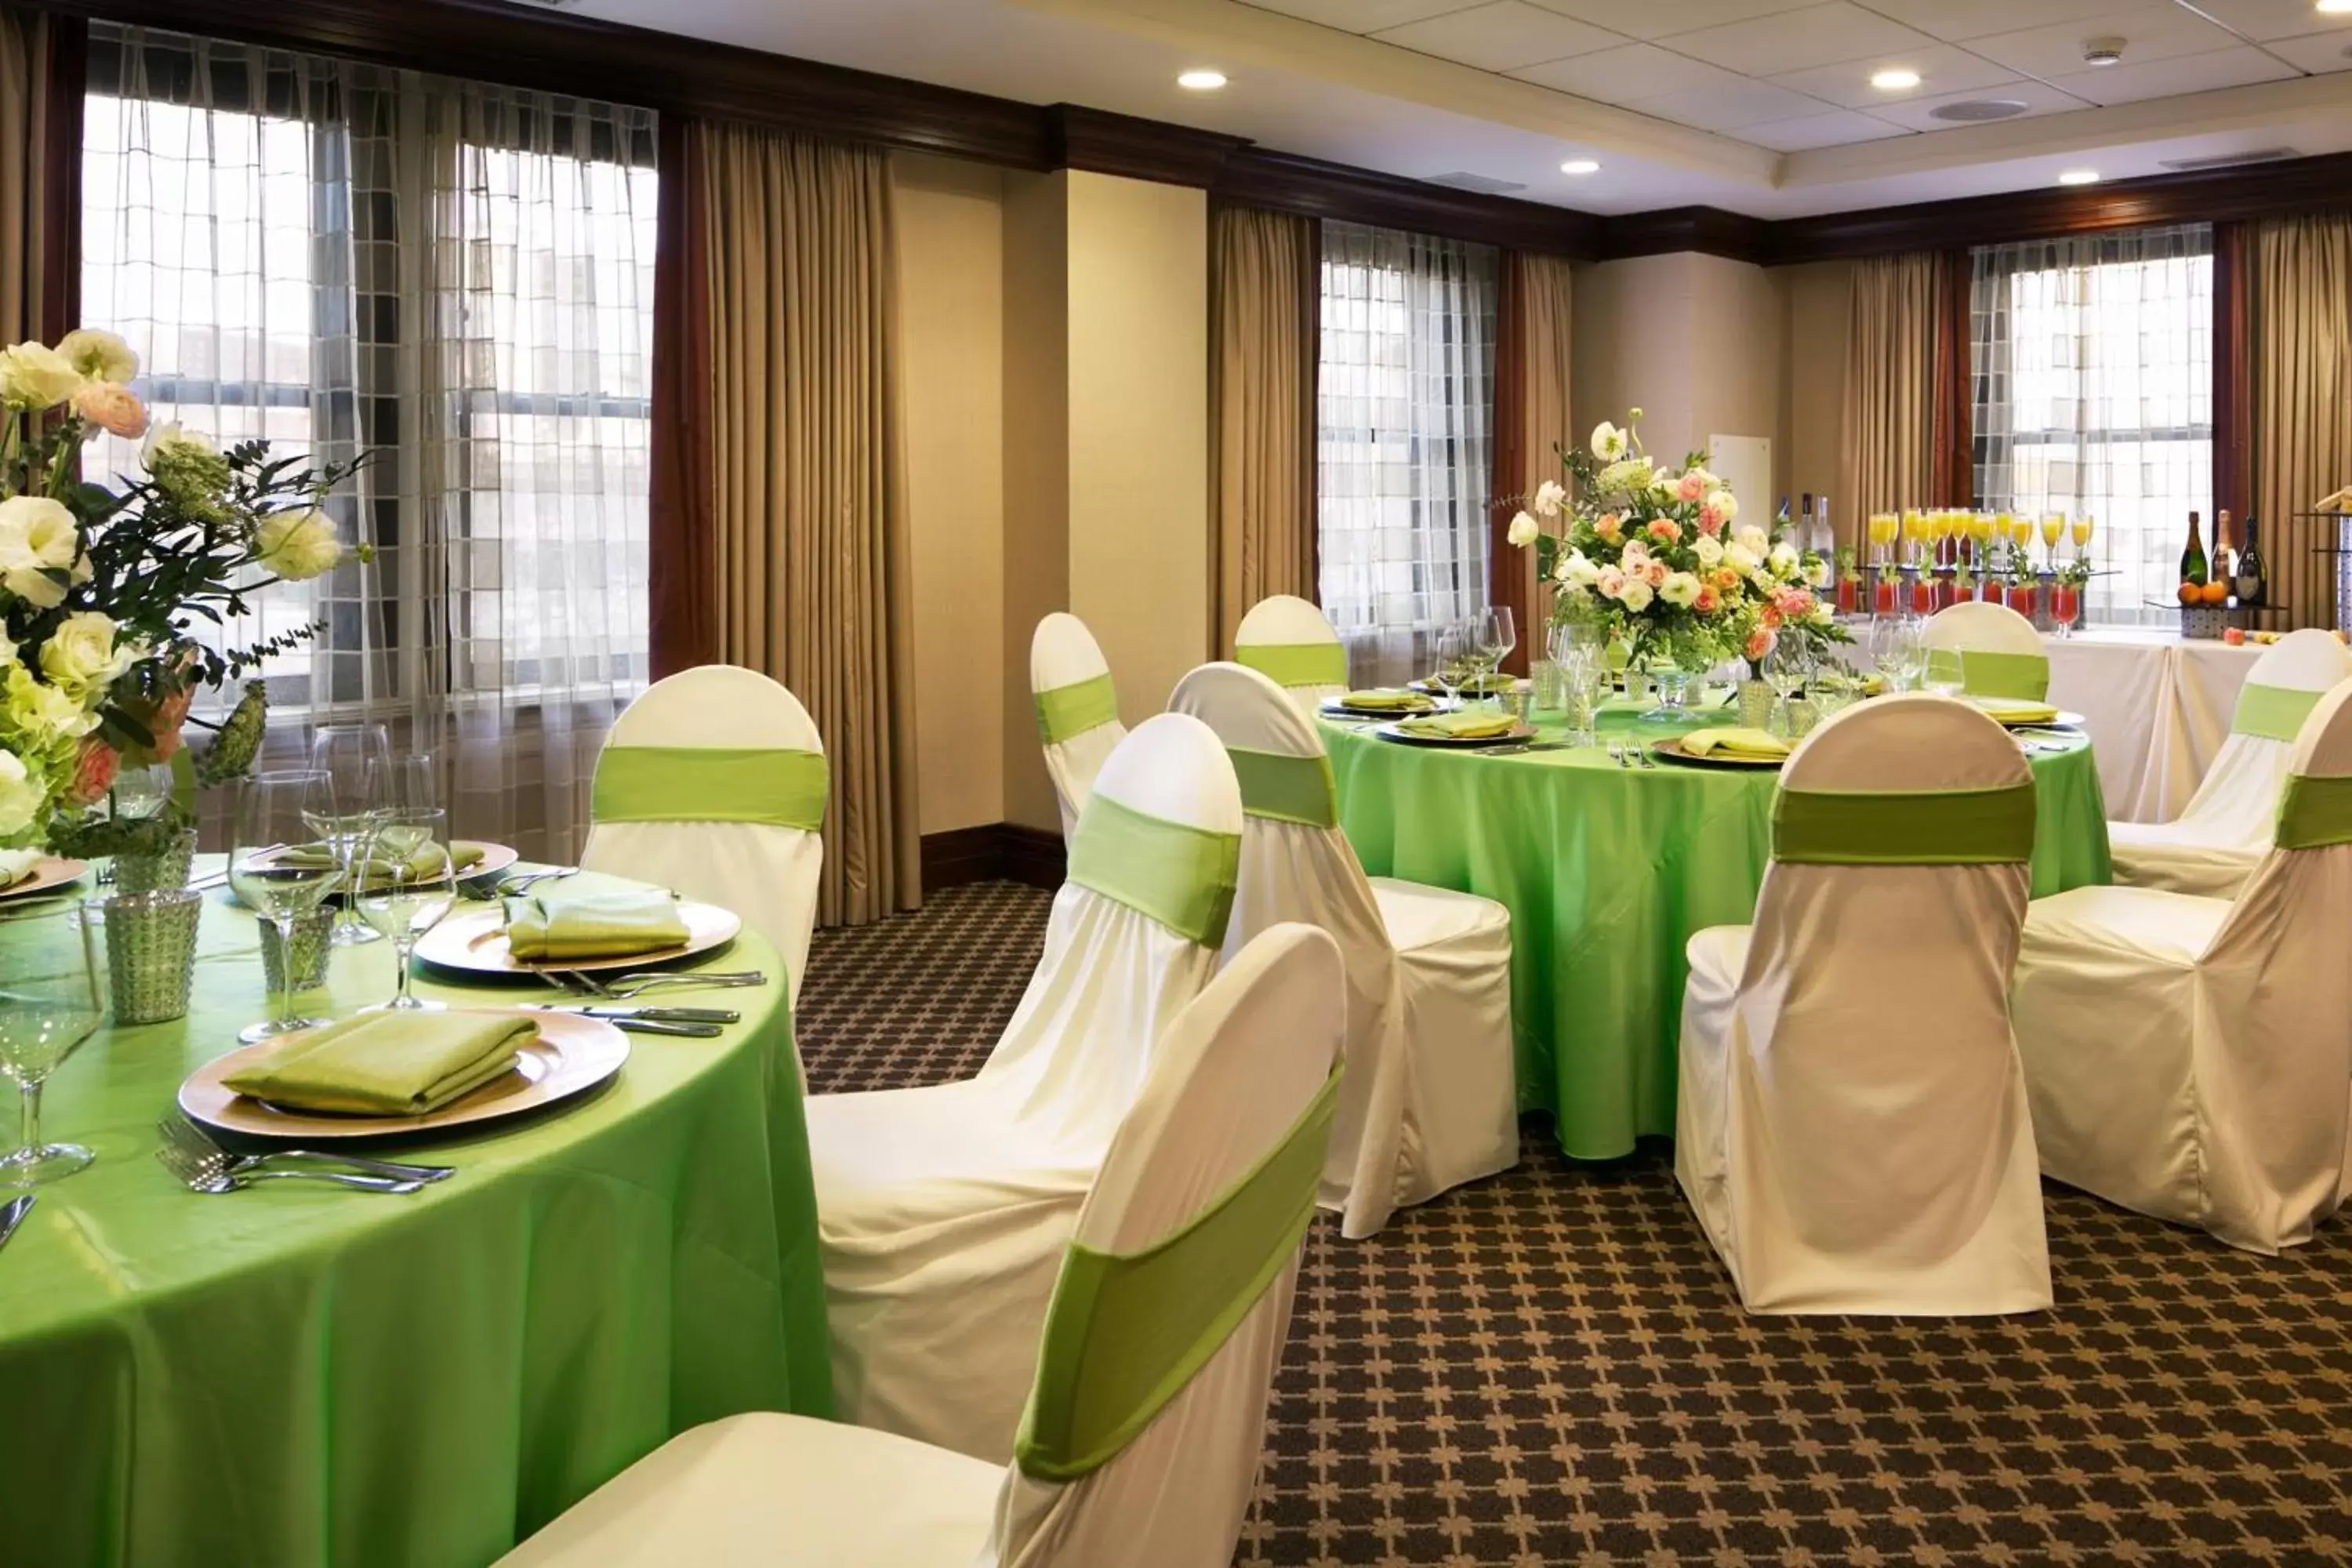 Meeting/conference room, Banquet Facilities in The Raphael Hotel, Autograph Collection